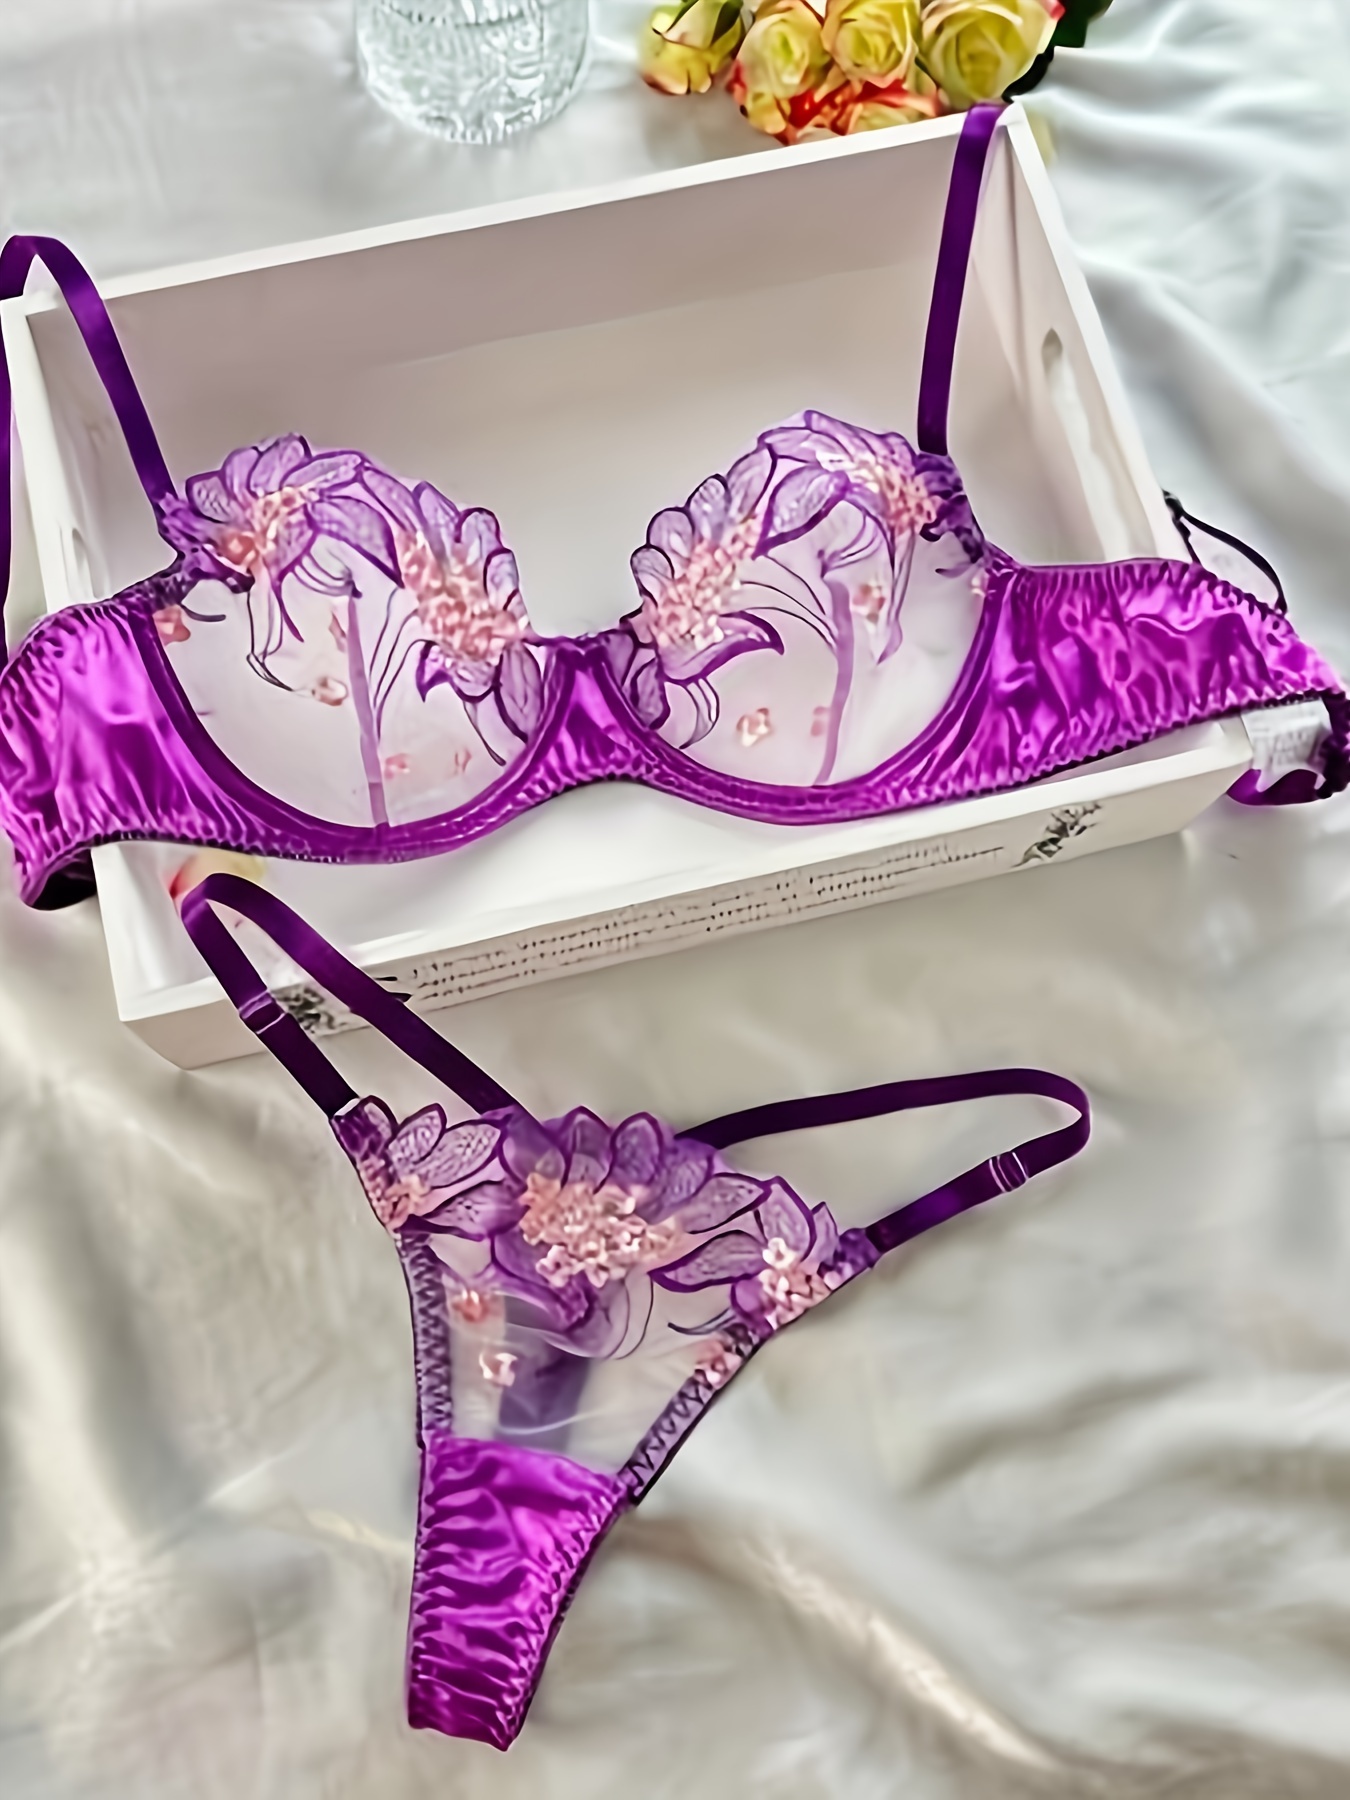 Floral Embroidery Lingerie Set, Open Cup Bra & Thongs, Women's Sexy  Lingerie & Underwear